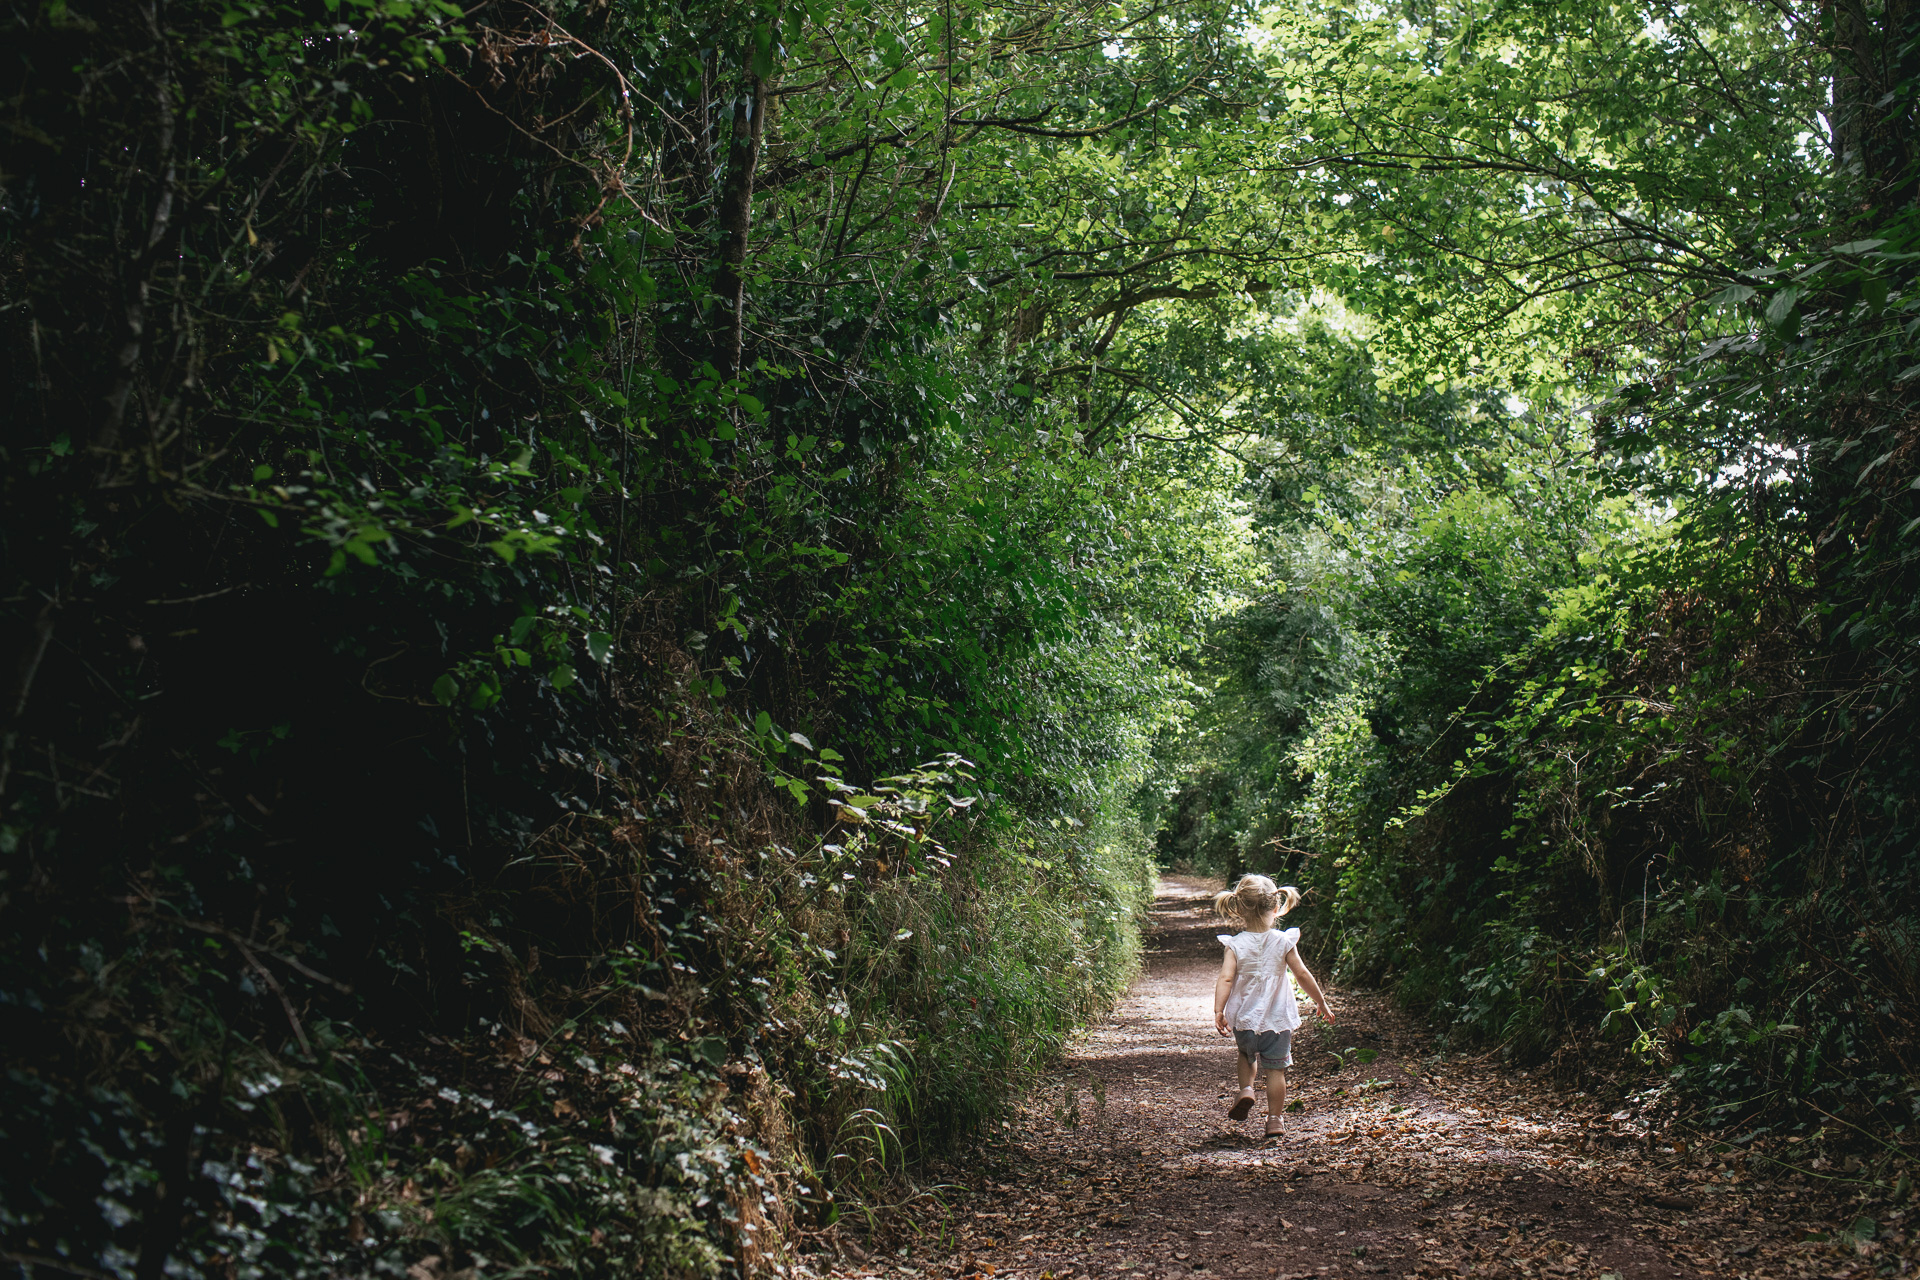 A small girl walking through a lane with trees above